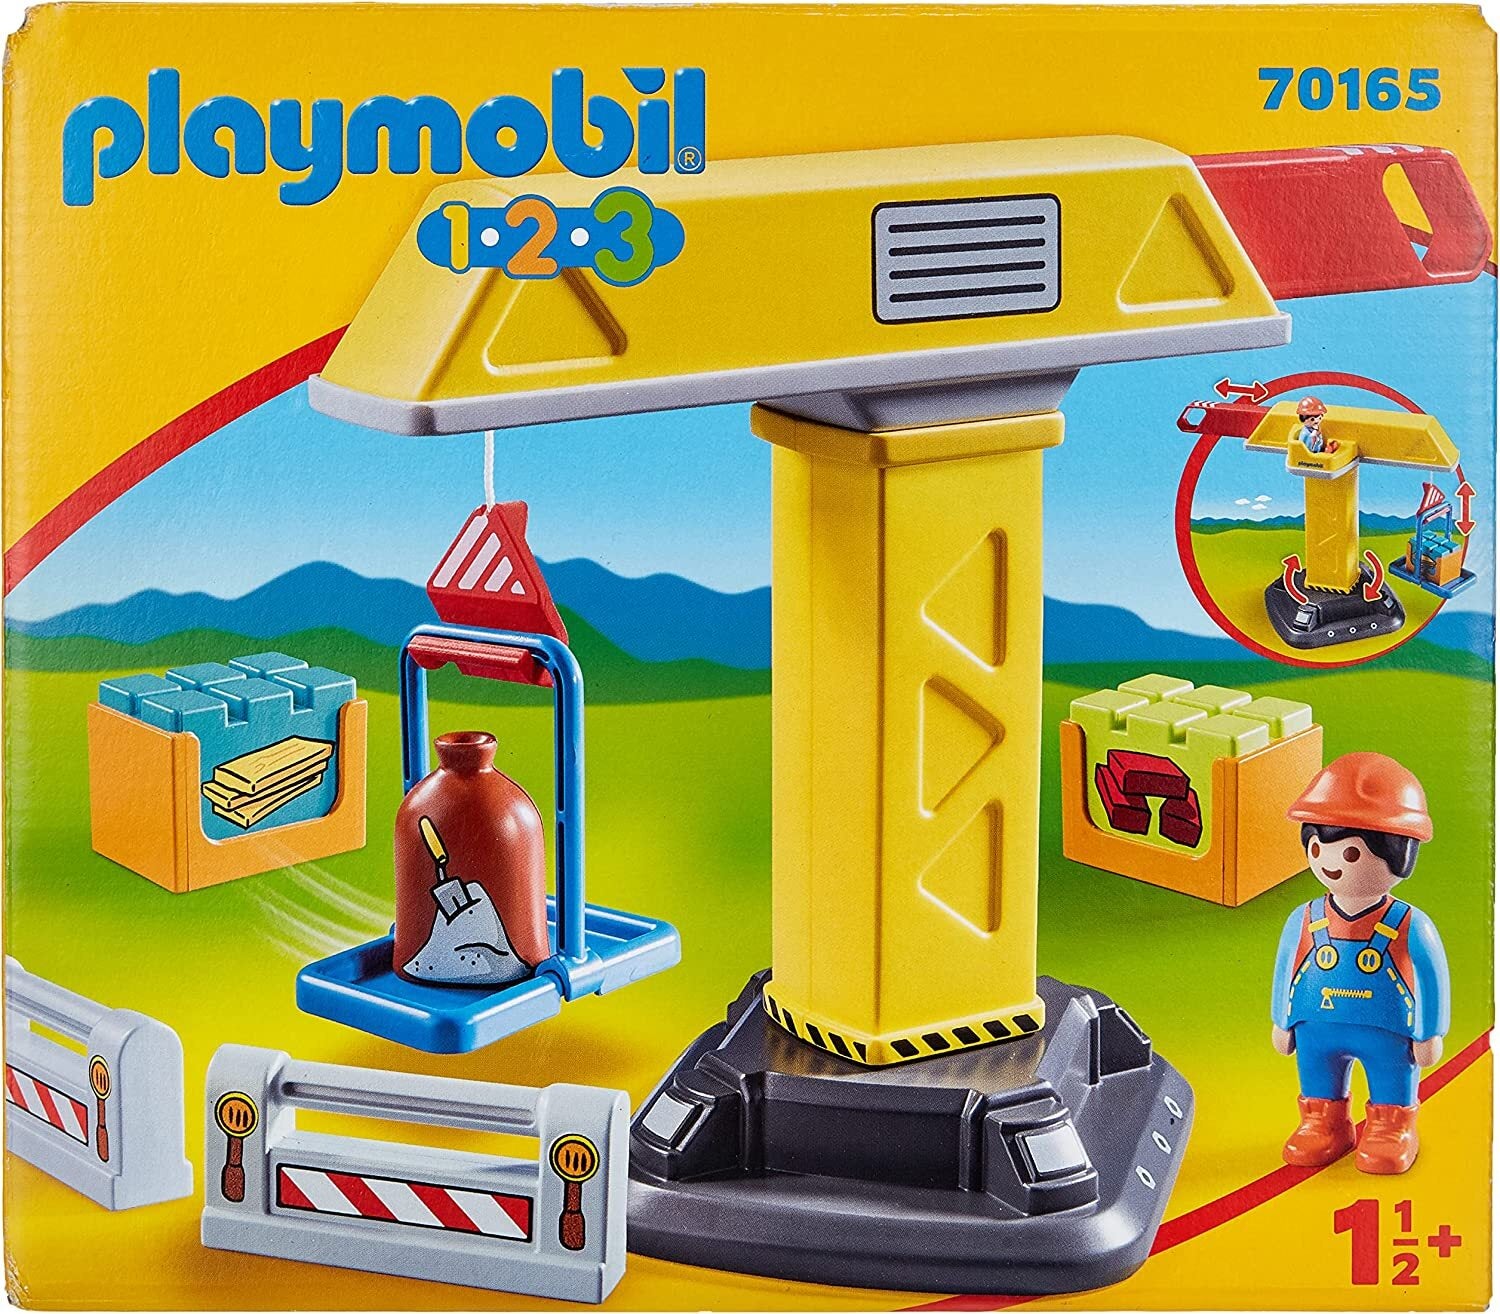 123 Playmobil Construction Crane  NW Indiana Toys In The Attic Stores